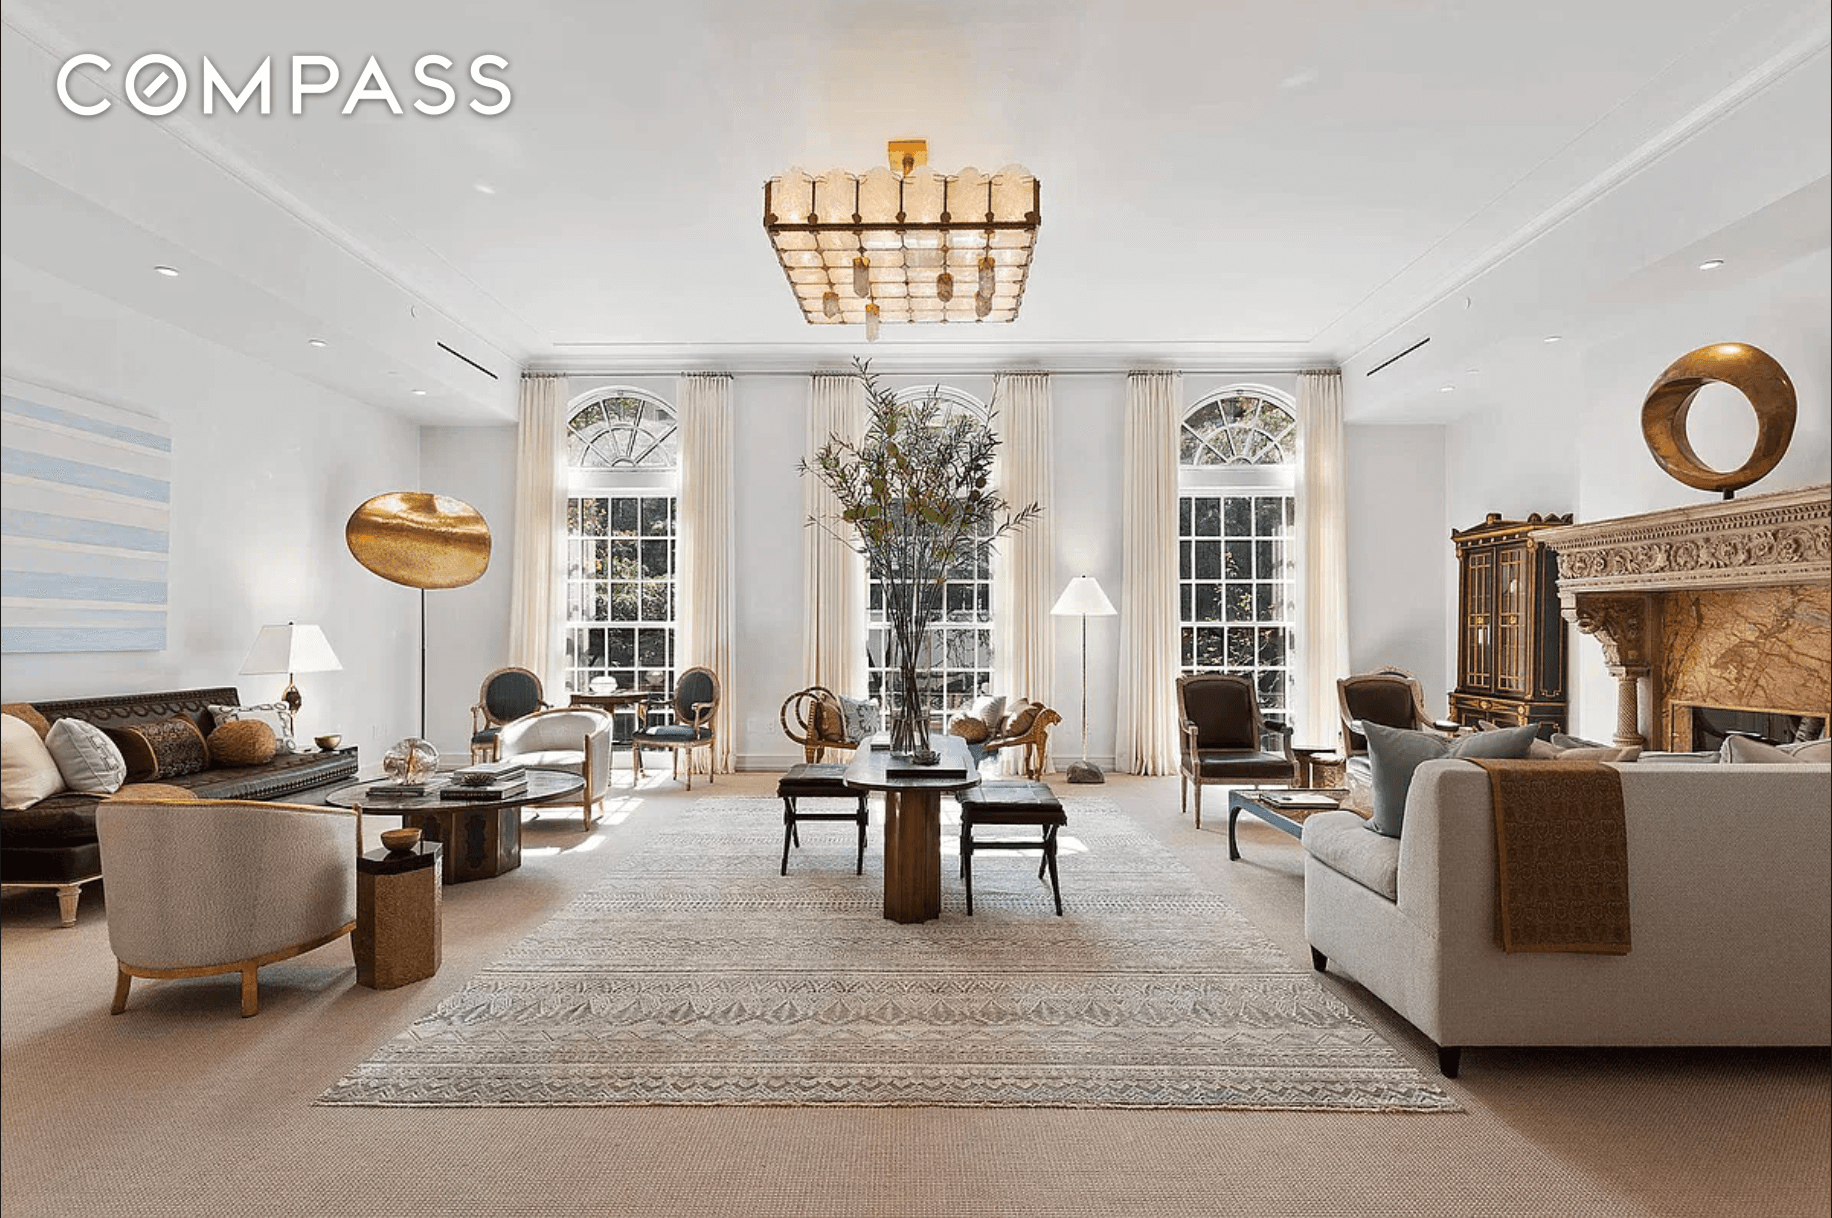 Designed by famed architect, Grosvenor Atterbury in 1901, this 33 wide townhouse features the privacy and exclusivity of a single family home while offering all the conveniences of a full ...